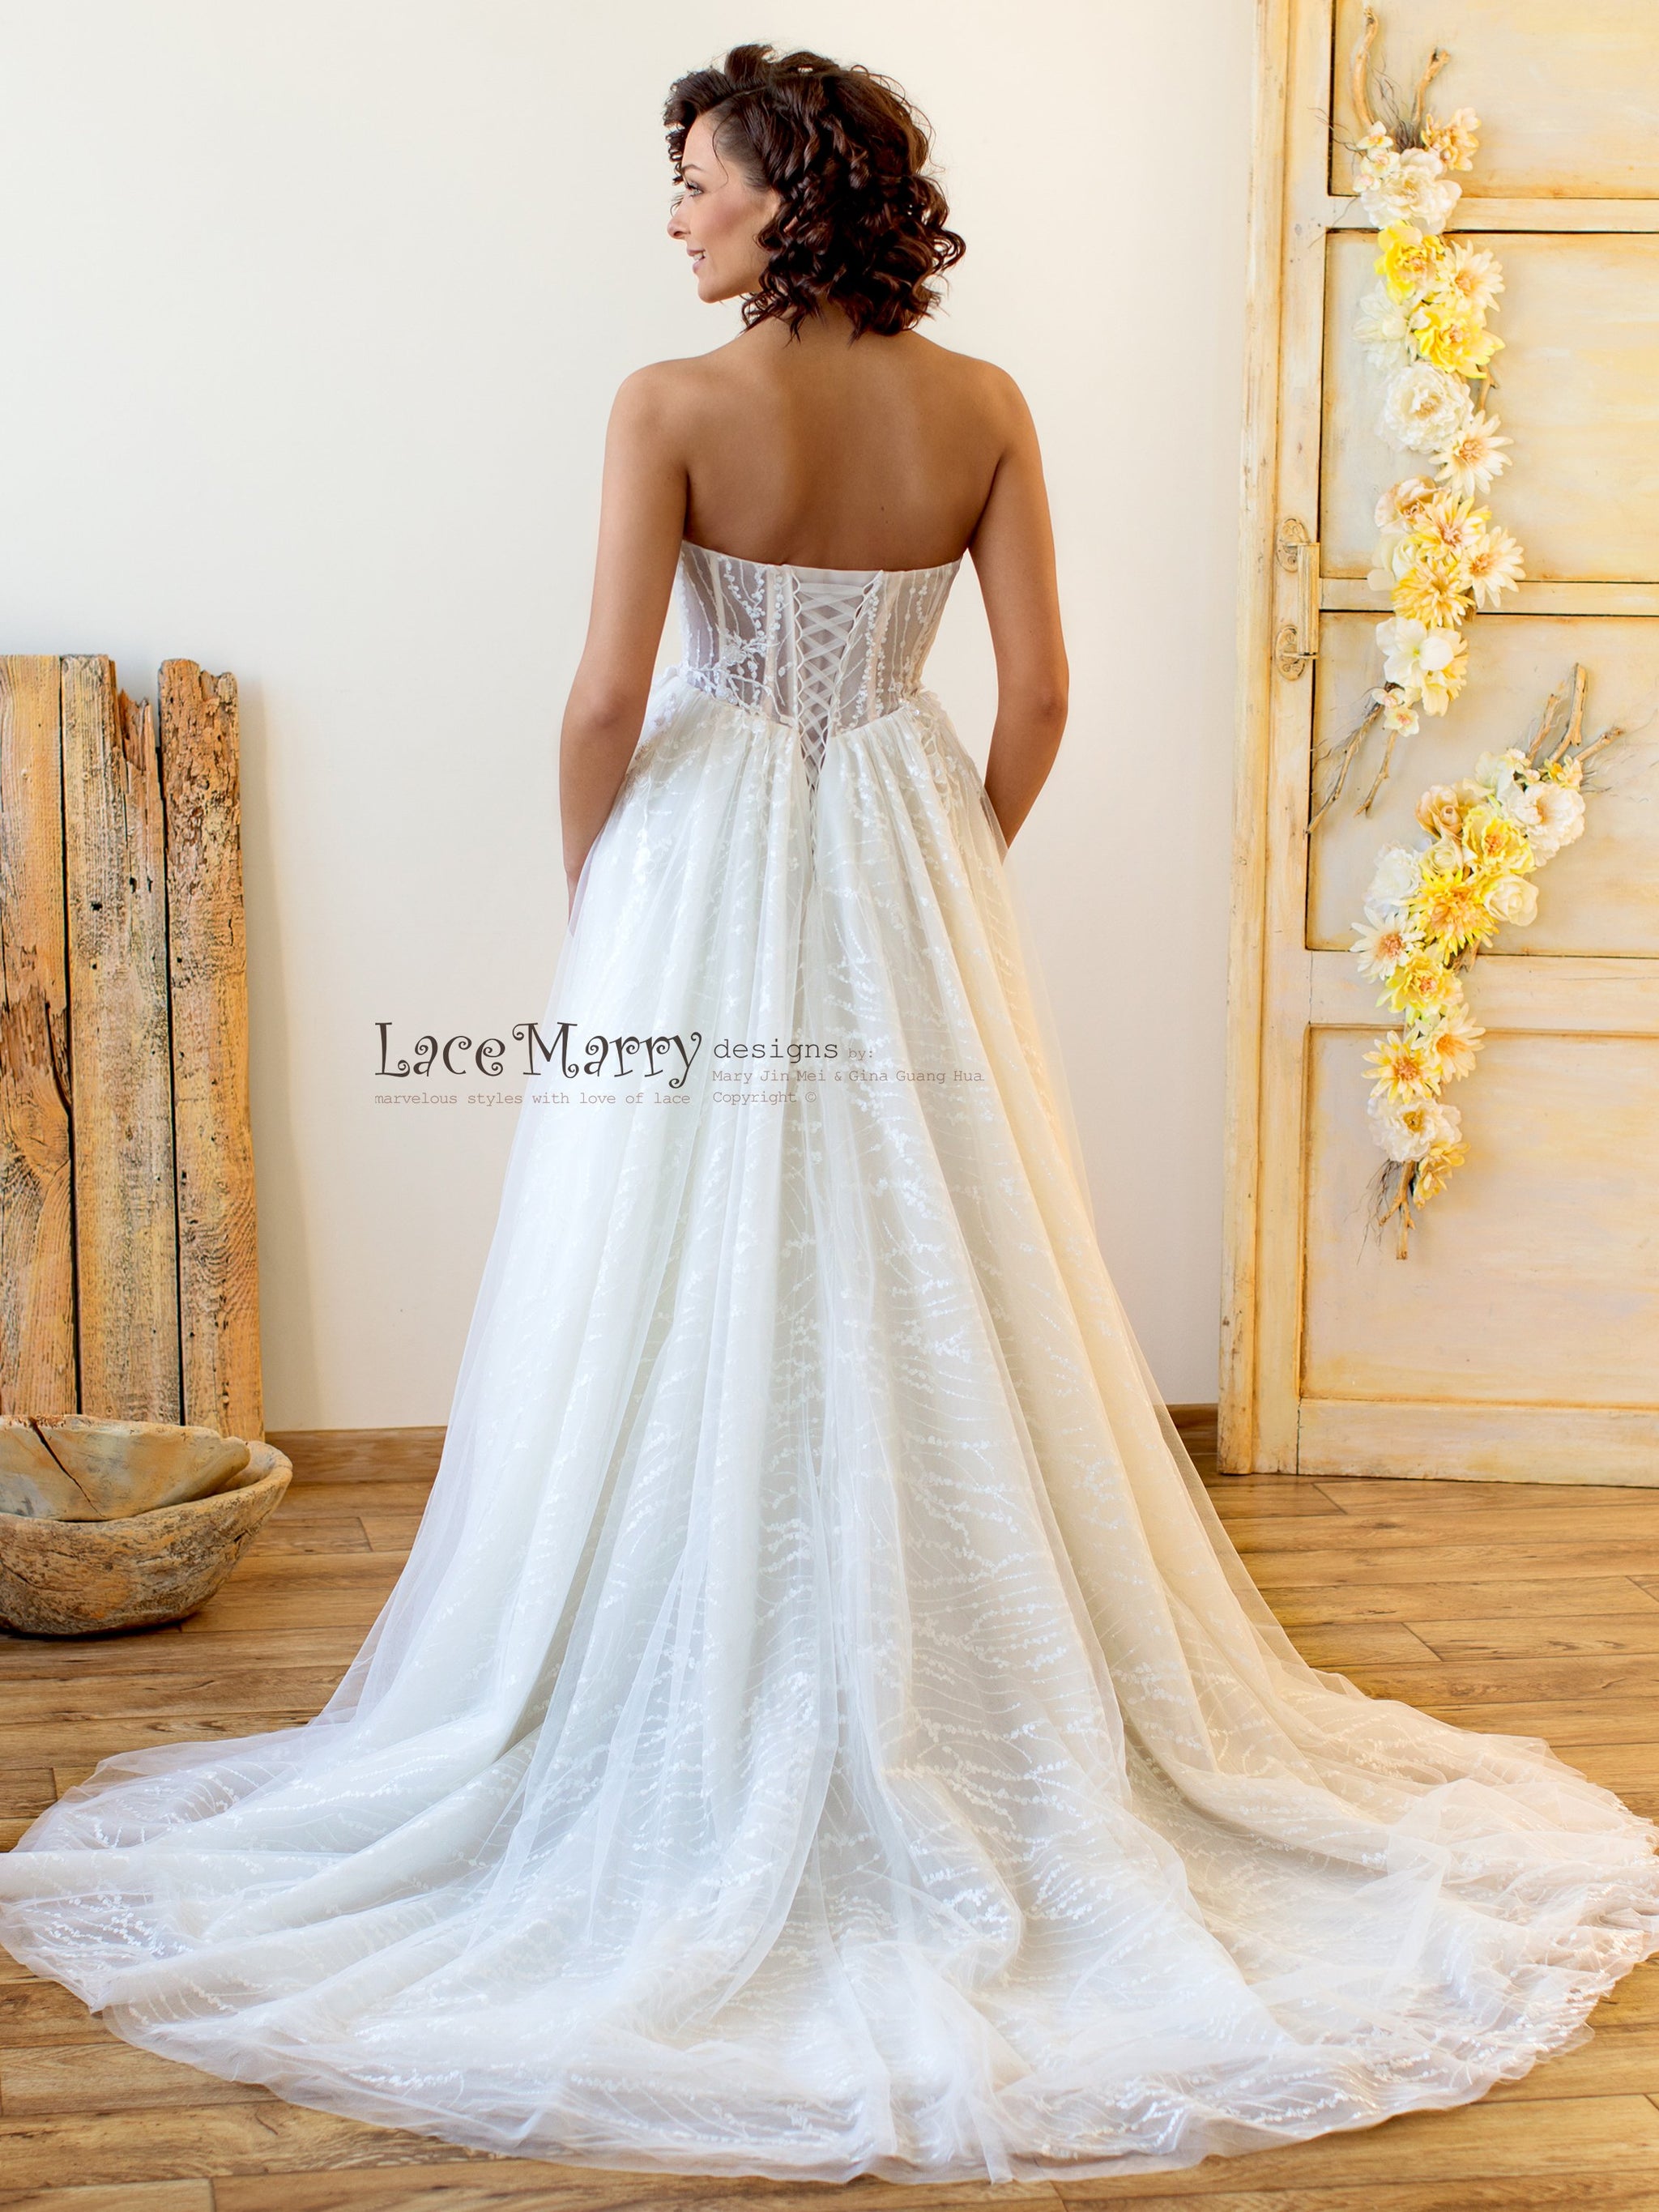 Sexy Lace-up Corset With Cups Wedding Dress. Ivory Floral Lace